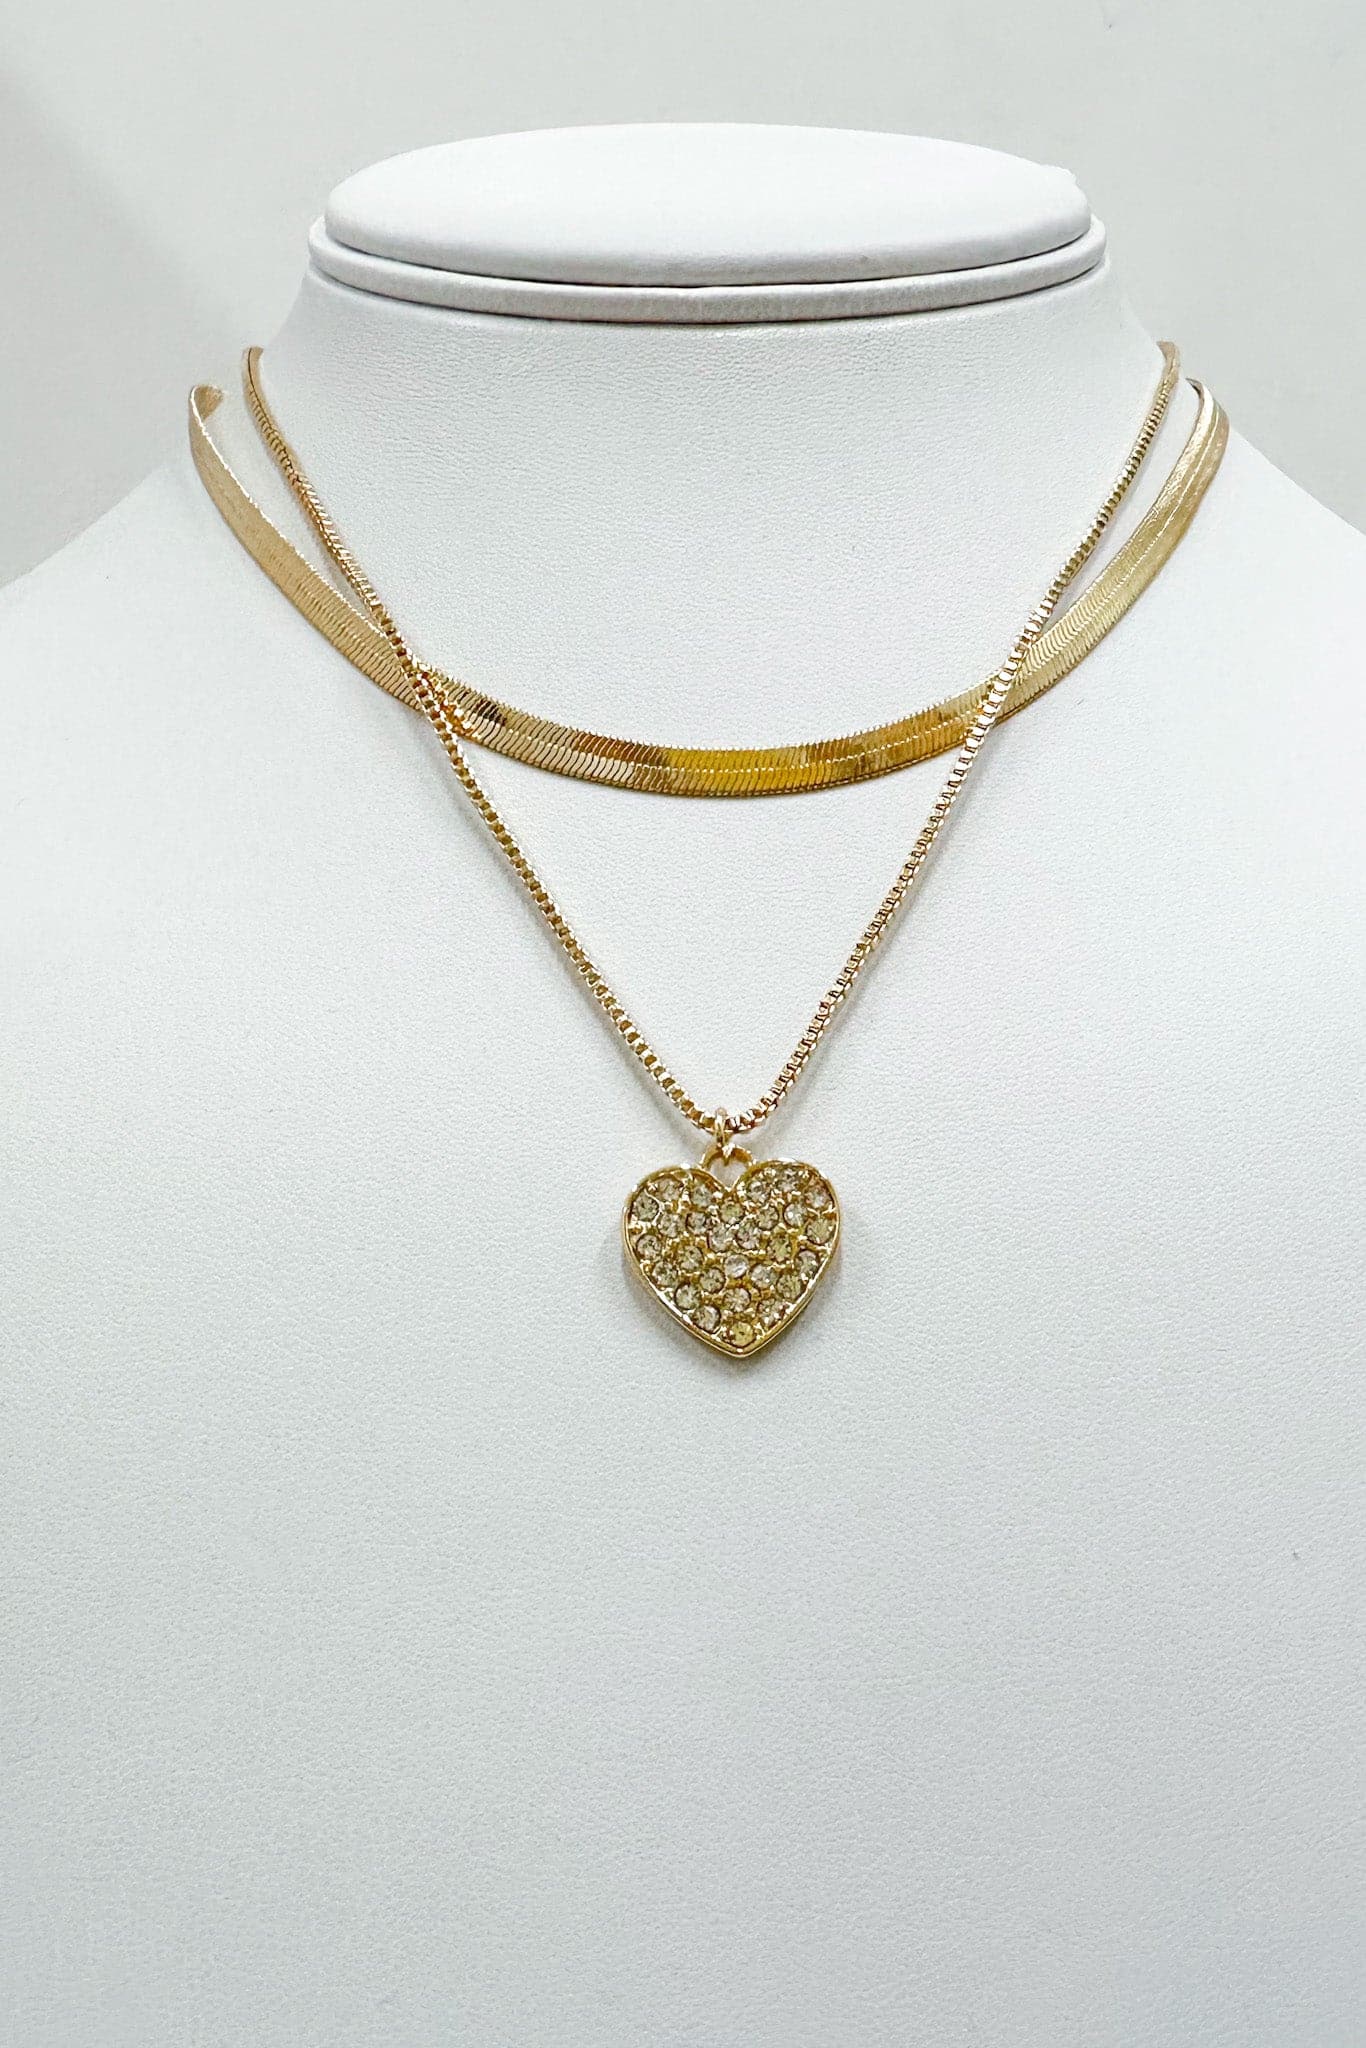 Gold Always Lover CZ Heart Charm Necklace - Madison and Mallory